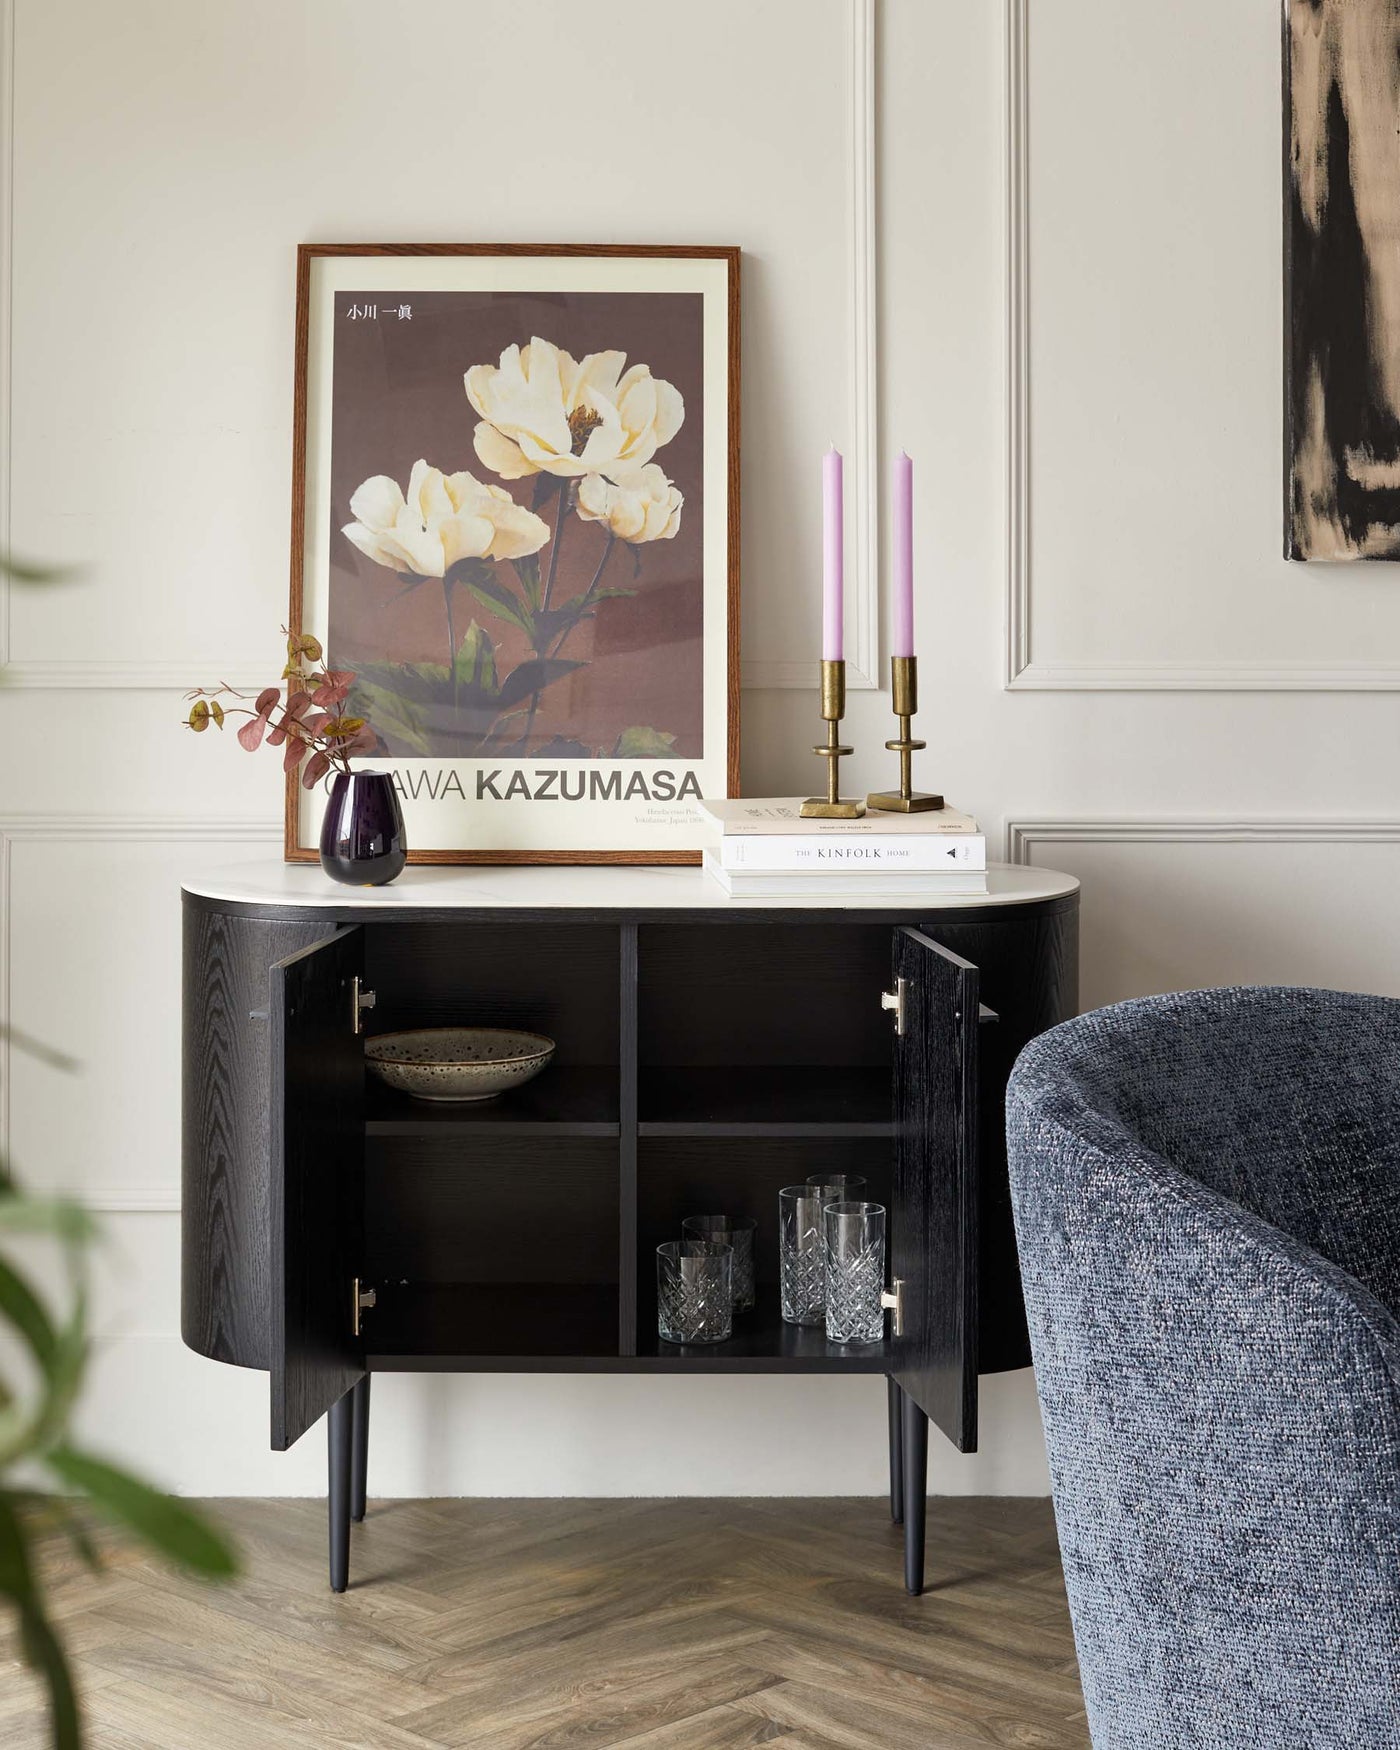 A sleek, semi-circular dark wooden console table with a white tabletop, featuring two cabinet doors with brass handles and slim, tapered legs. Shelves inside the cabinet display decorative items, and the table surface is styled with books, a purple vase with flowers, and a pair of pink candles in brass holders. A large framed floral artwork rests against the wall above the console.